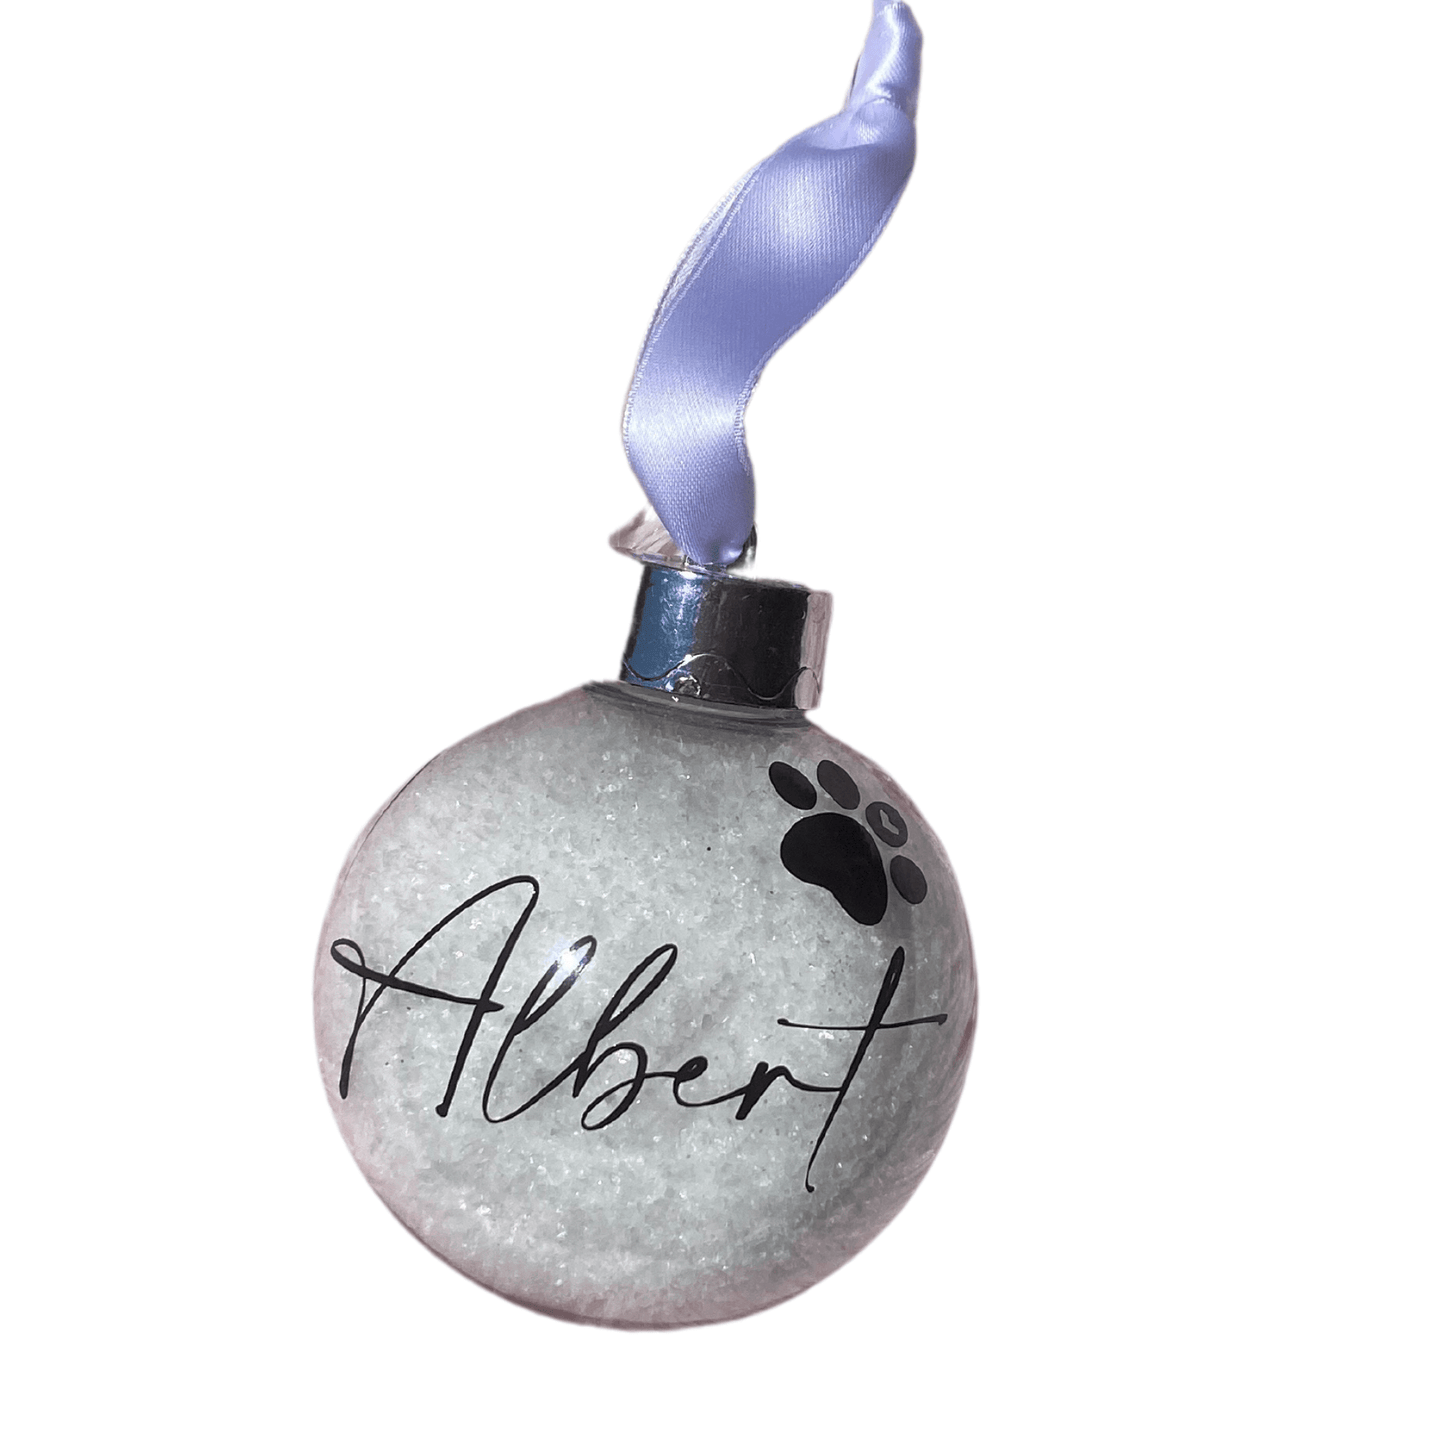 Christmas bauble personalised with your pet's name Let's Pawty